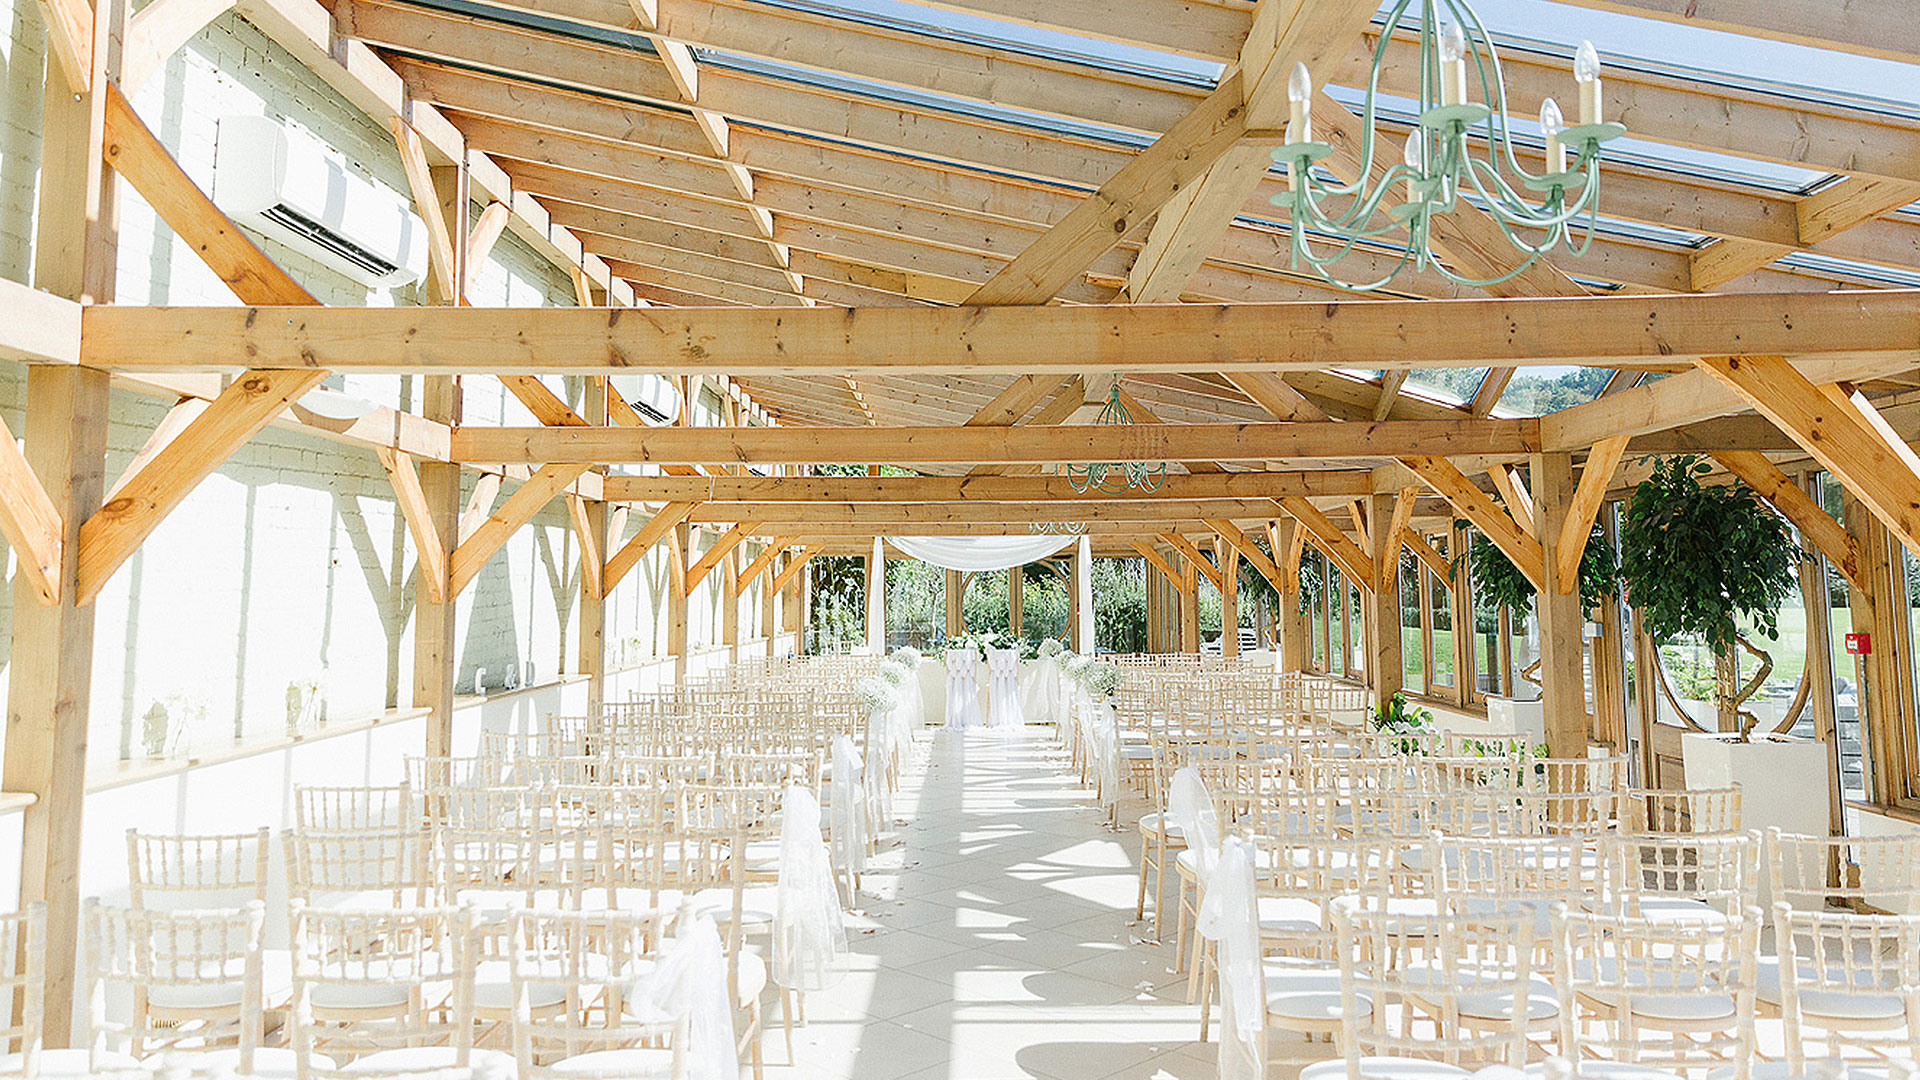 Rows of white wooden chairs line the Orangery ready for a beautiful and unique wedding ceremony